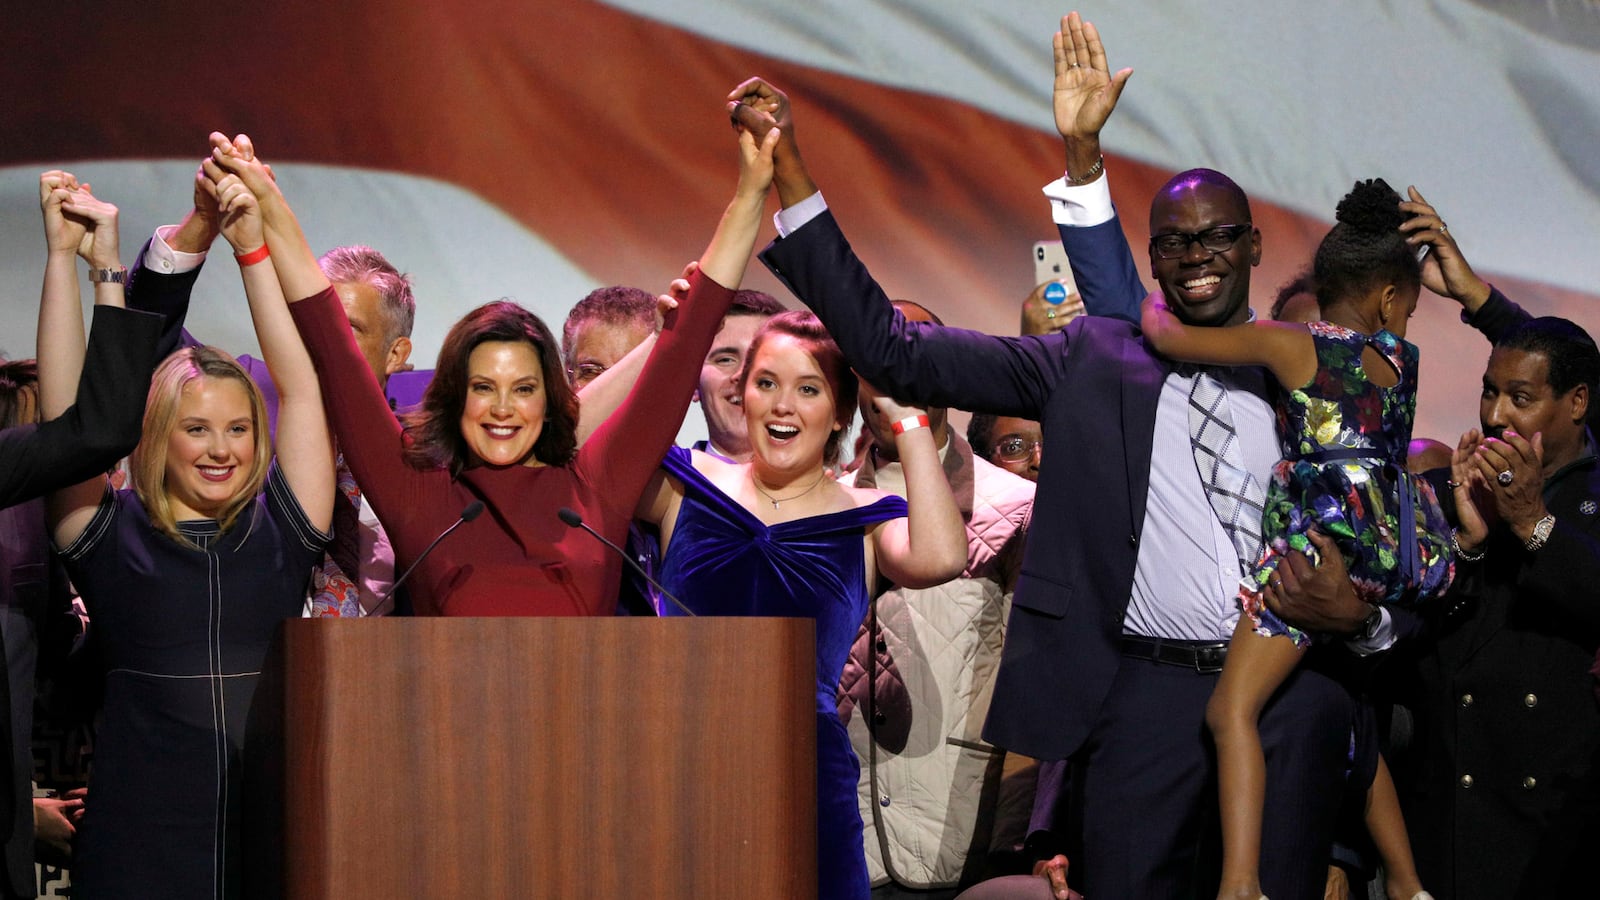 Gretchen Whitmer spoke at a Democratic election night party in Detroit. Whitmer defeated Republican Bill Schuette, but she'd have to work with a GOP-dominated house to make good on her campaign promise of school finance reform.